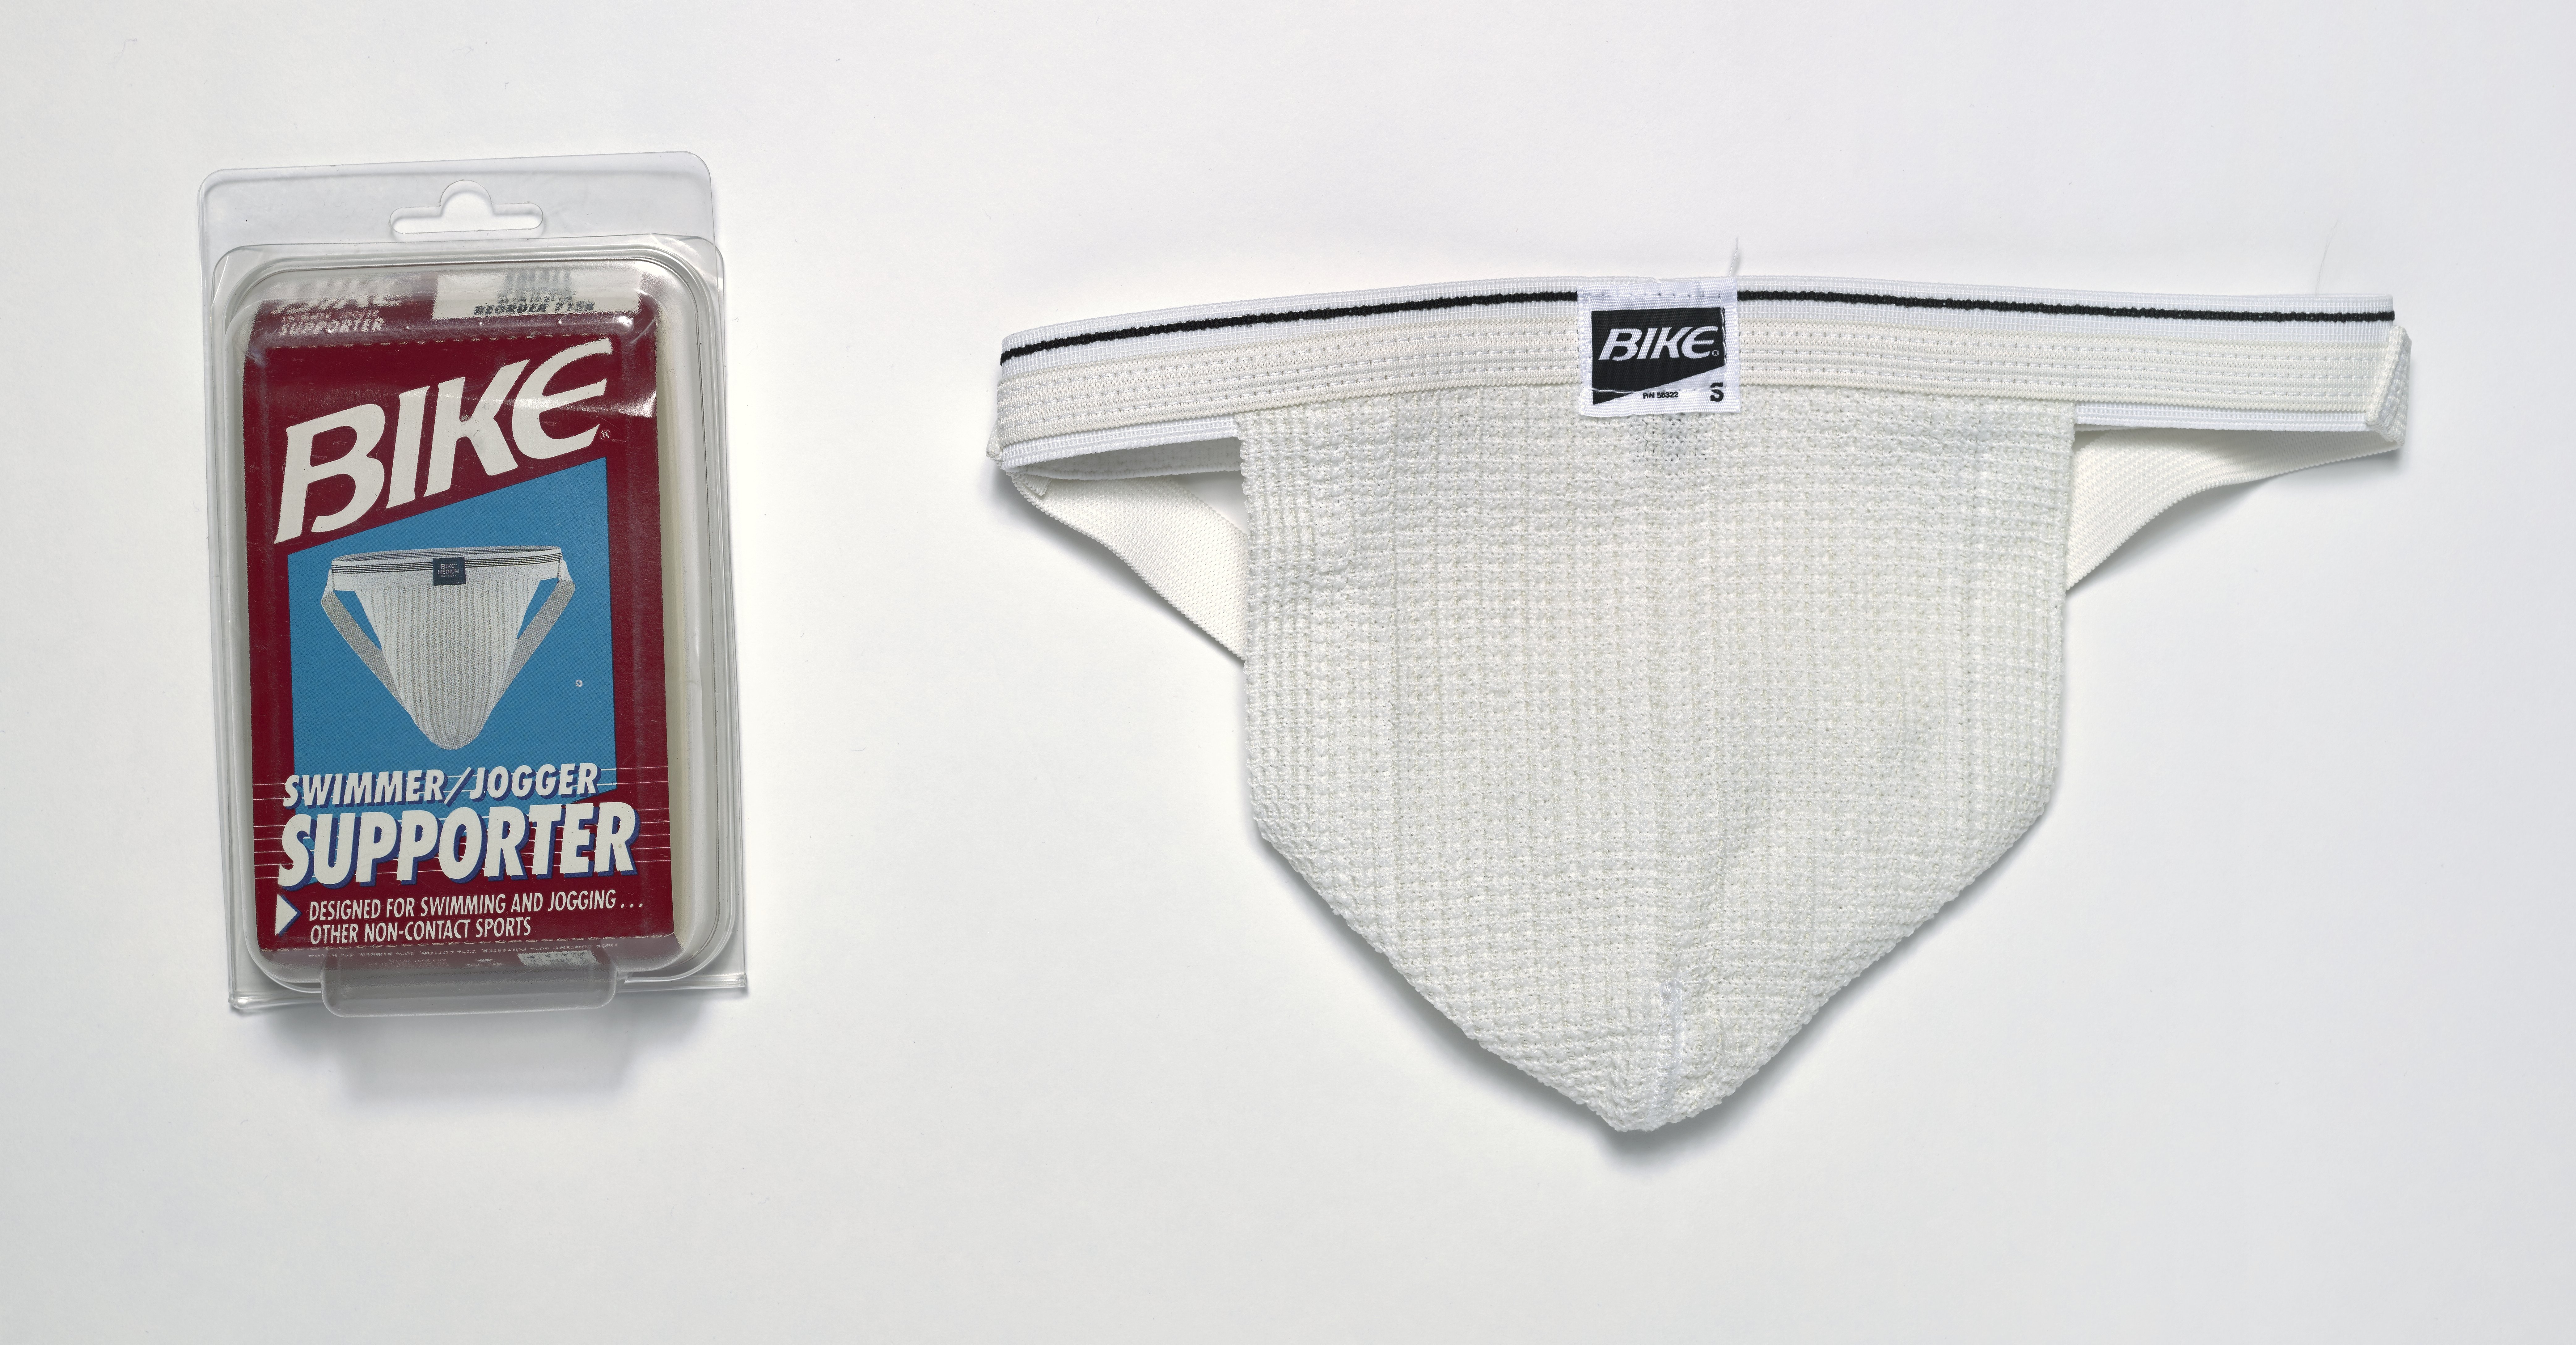 Bike Swimmer/Jogger Athletic Supporter - Science History Institute Digital  Collections